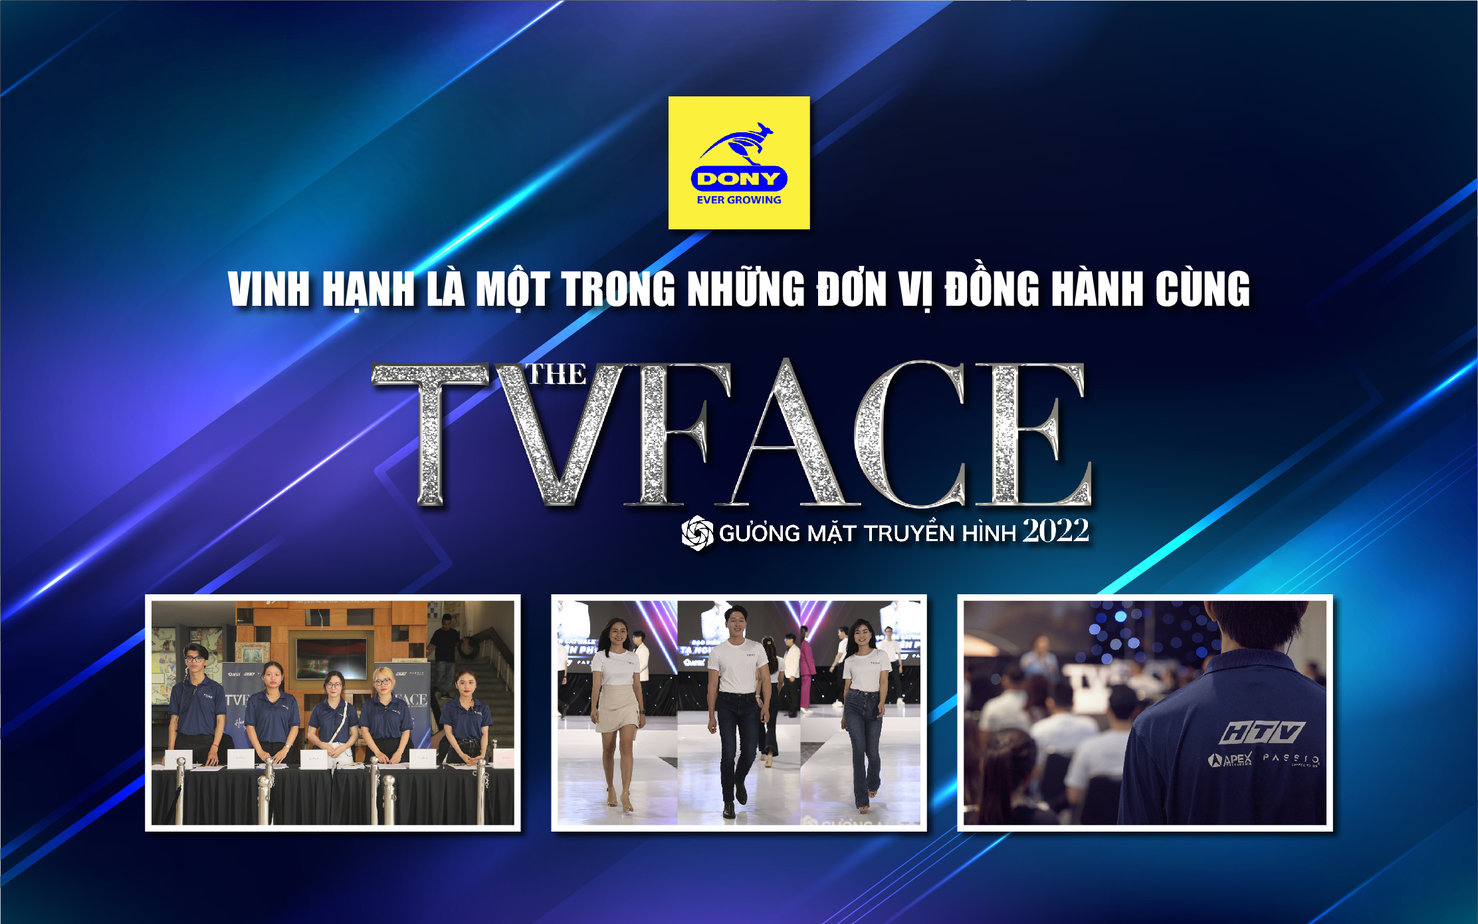 - DONY Is Honored To Be One Of The Companion Units With "The TVFace 2022"